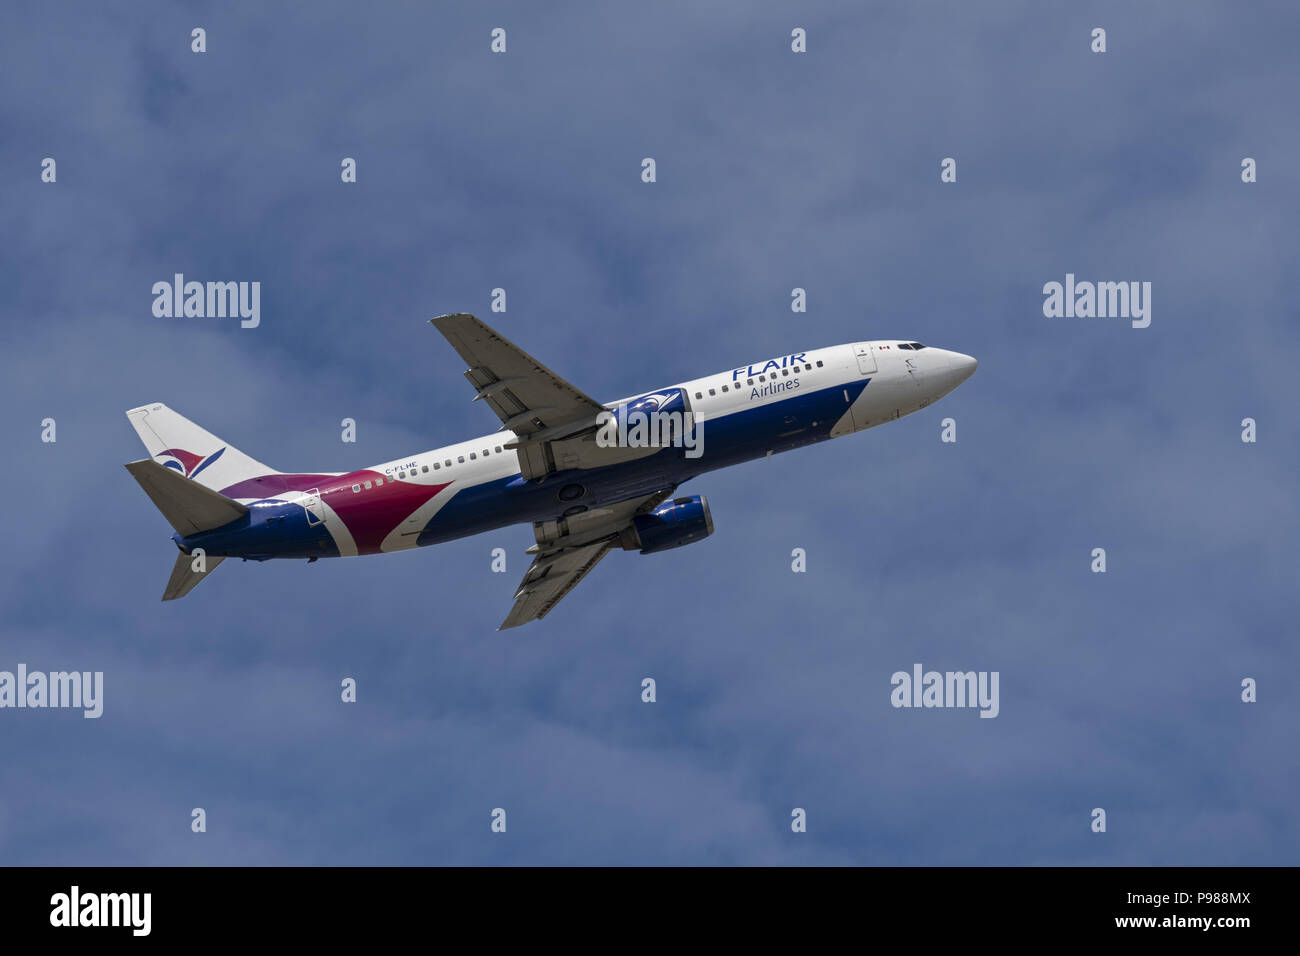 Vancouver, British Columbia, Canada. 7th July, 2018. A Flair Airlines Boeing 737-400 (C-FLHE) single-aisle narrow-body jet airliner airborne after take-off. Credit: Bayne Stanley/ZUMA Wire/Alamy Live News Stock Photo